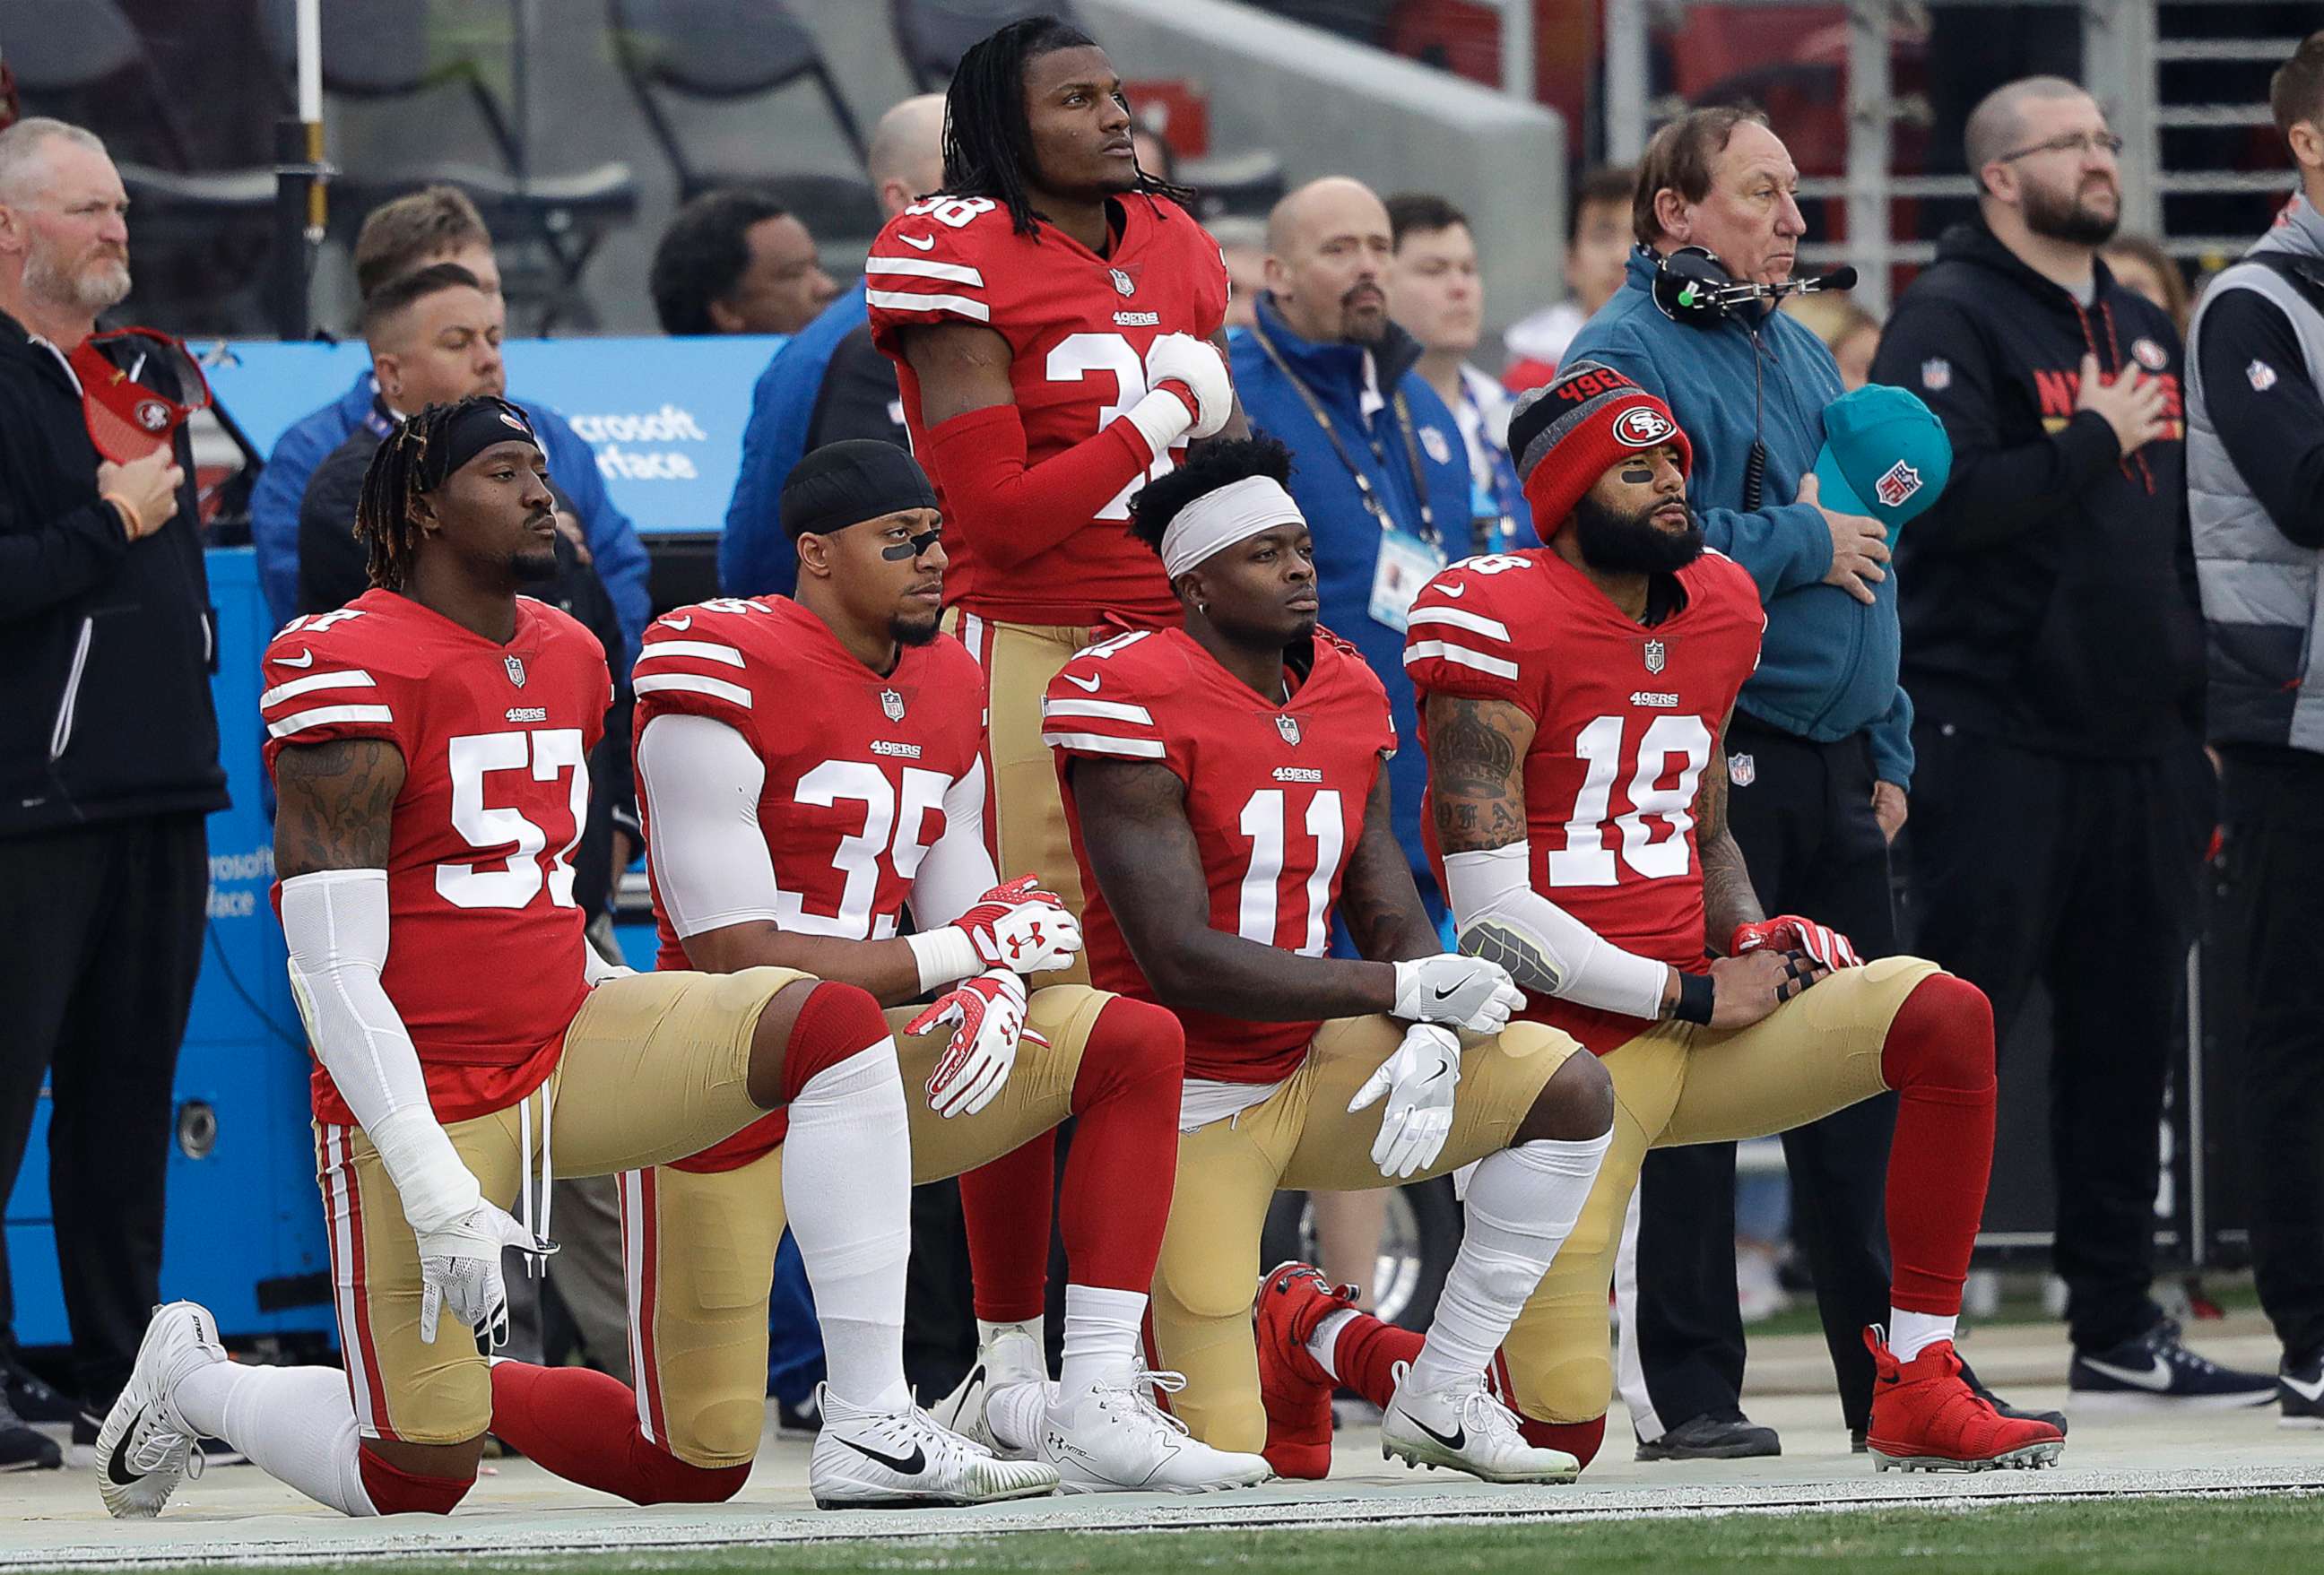 PHOTO: San Francisco 49ers' Eli Harold, Eric Reid, Marquise Goodwin and Louis Murphy kneel during the national anthem before an NFL football game against the Jacksonville Jaguars in Santa Clara, Calif., Dec. 24, 2017.